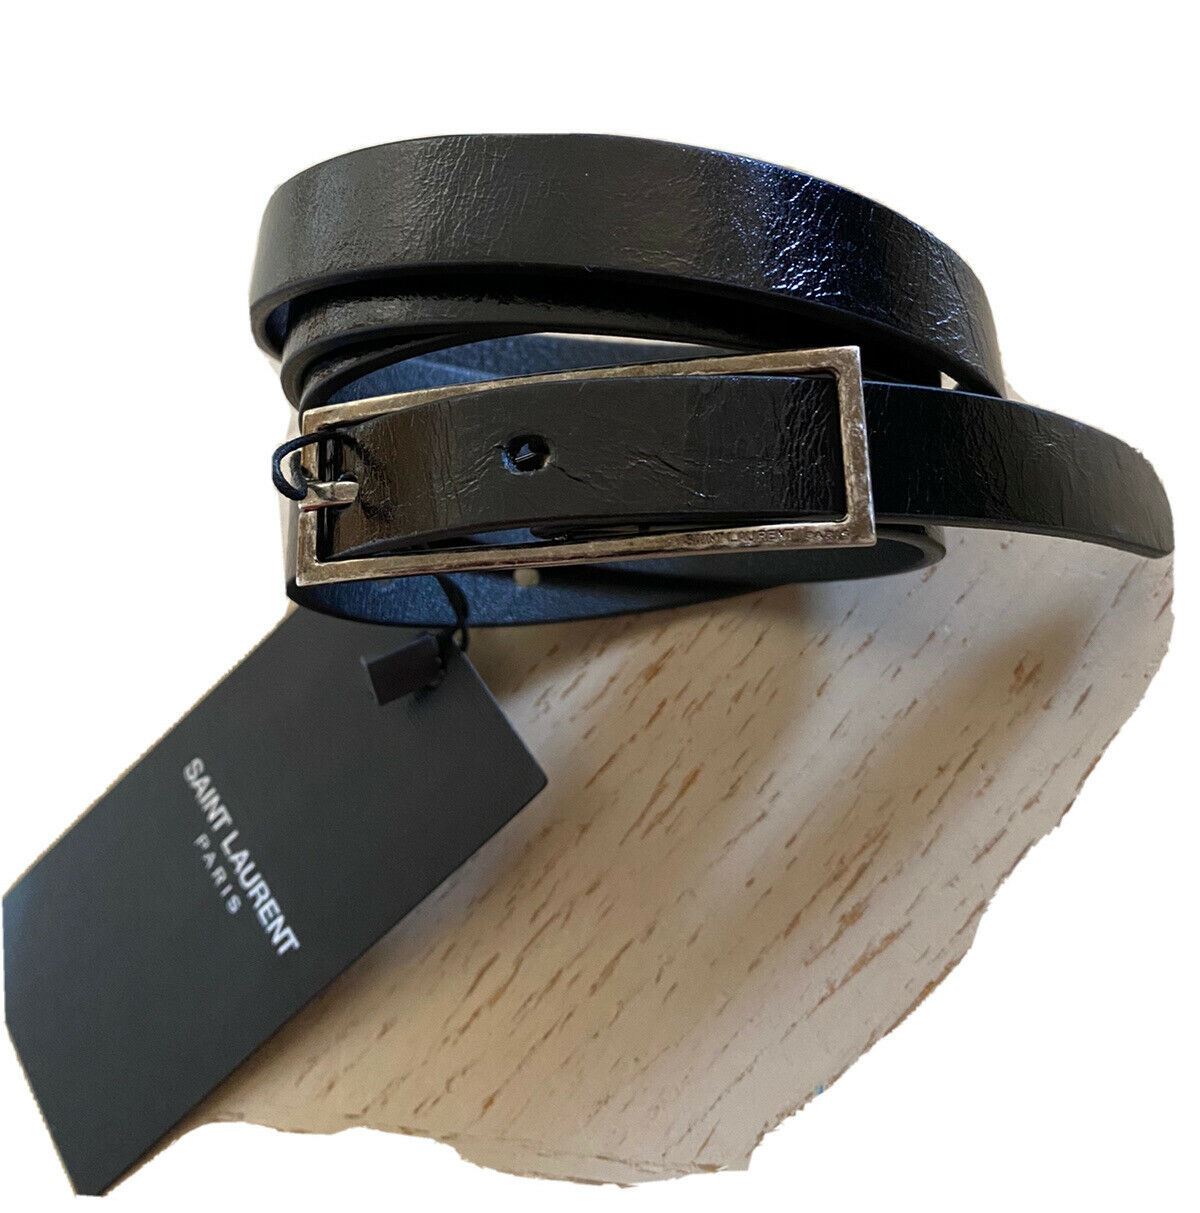 New Saint Laurent Fetiche Belt With Buckle In Shiny Moroder Leather Black 36/95